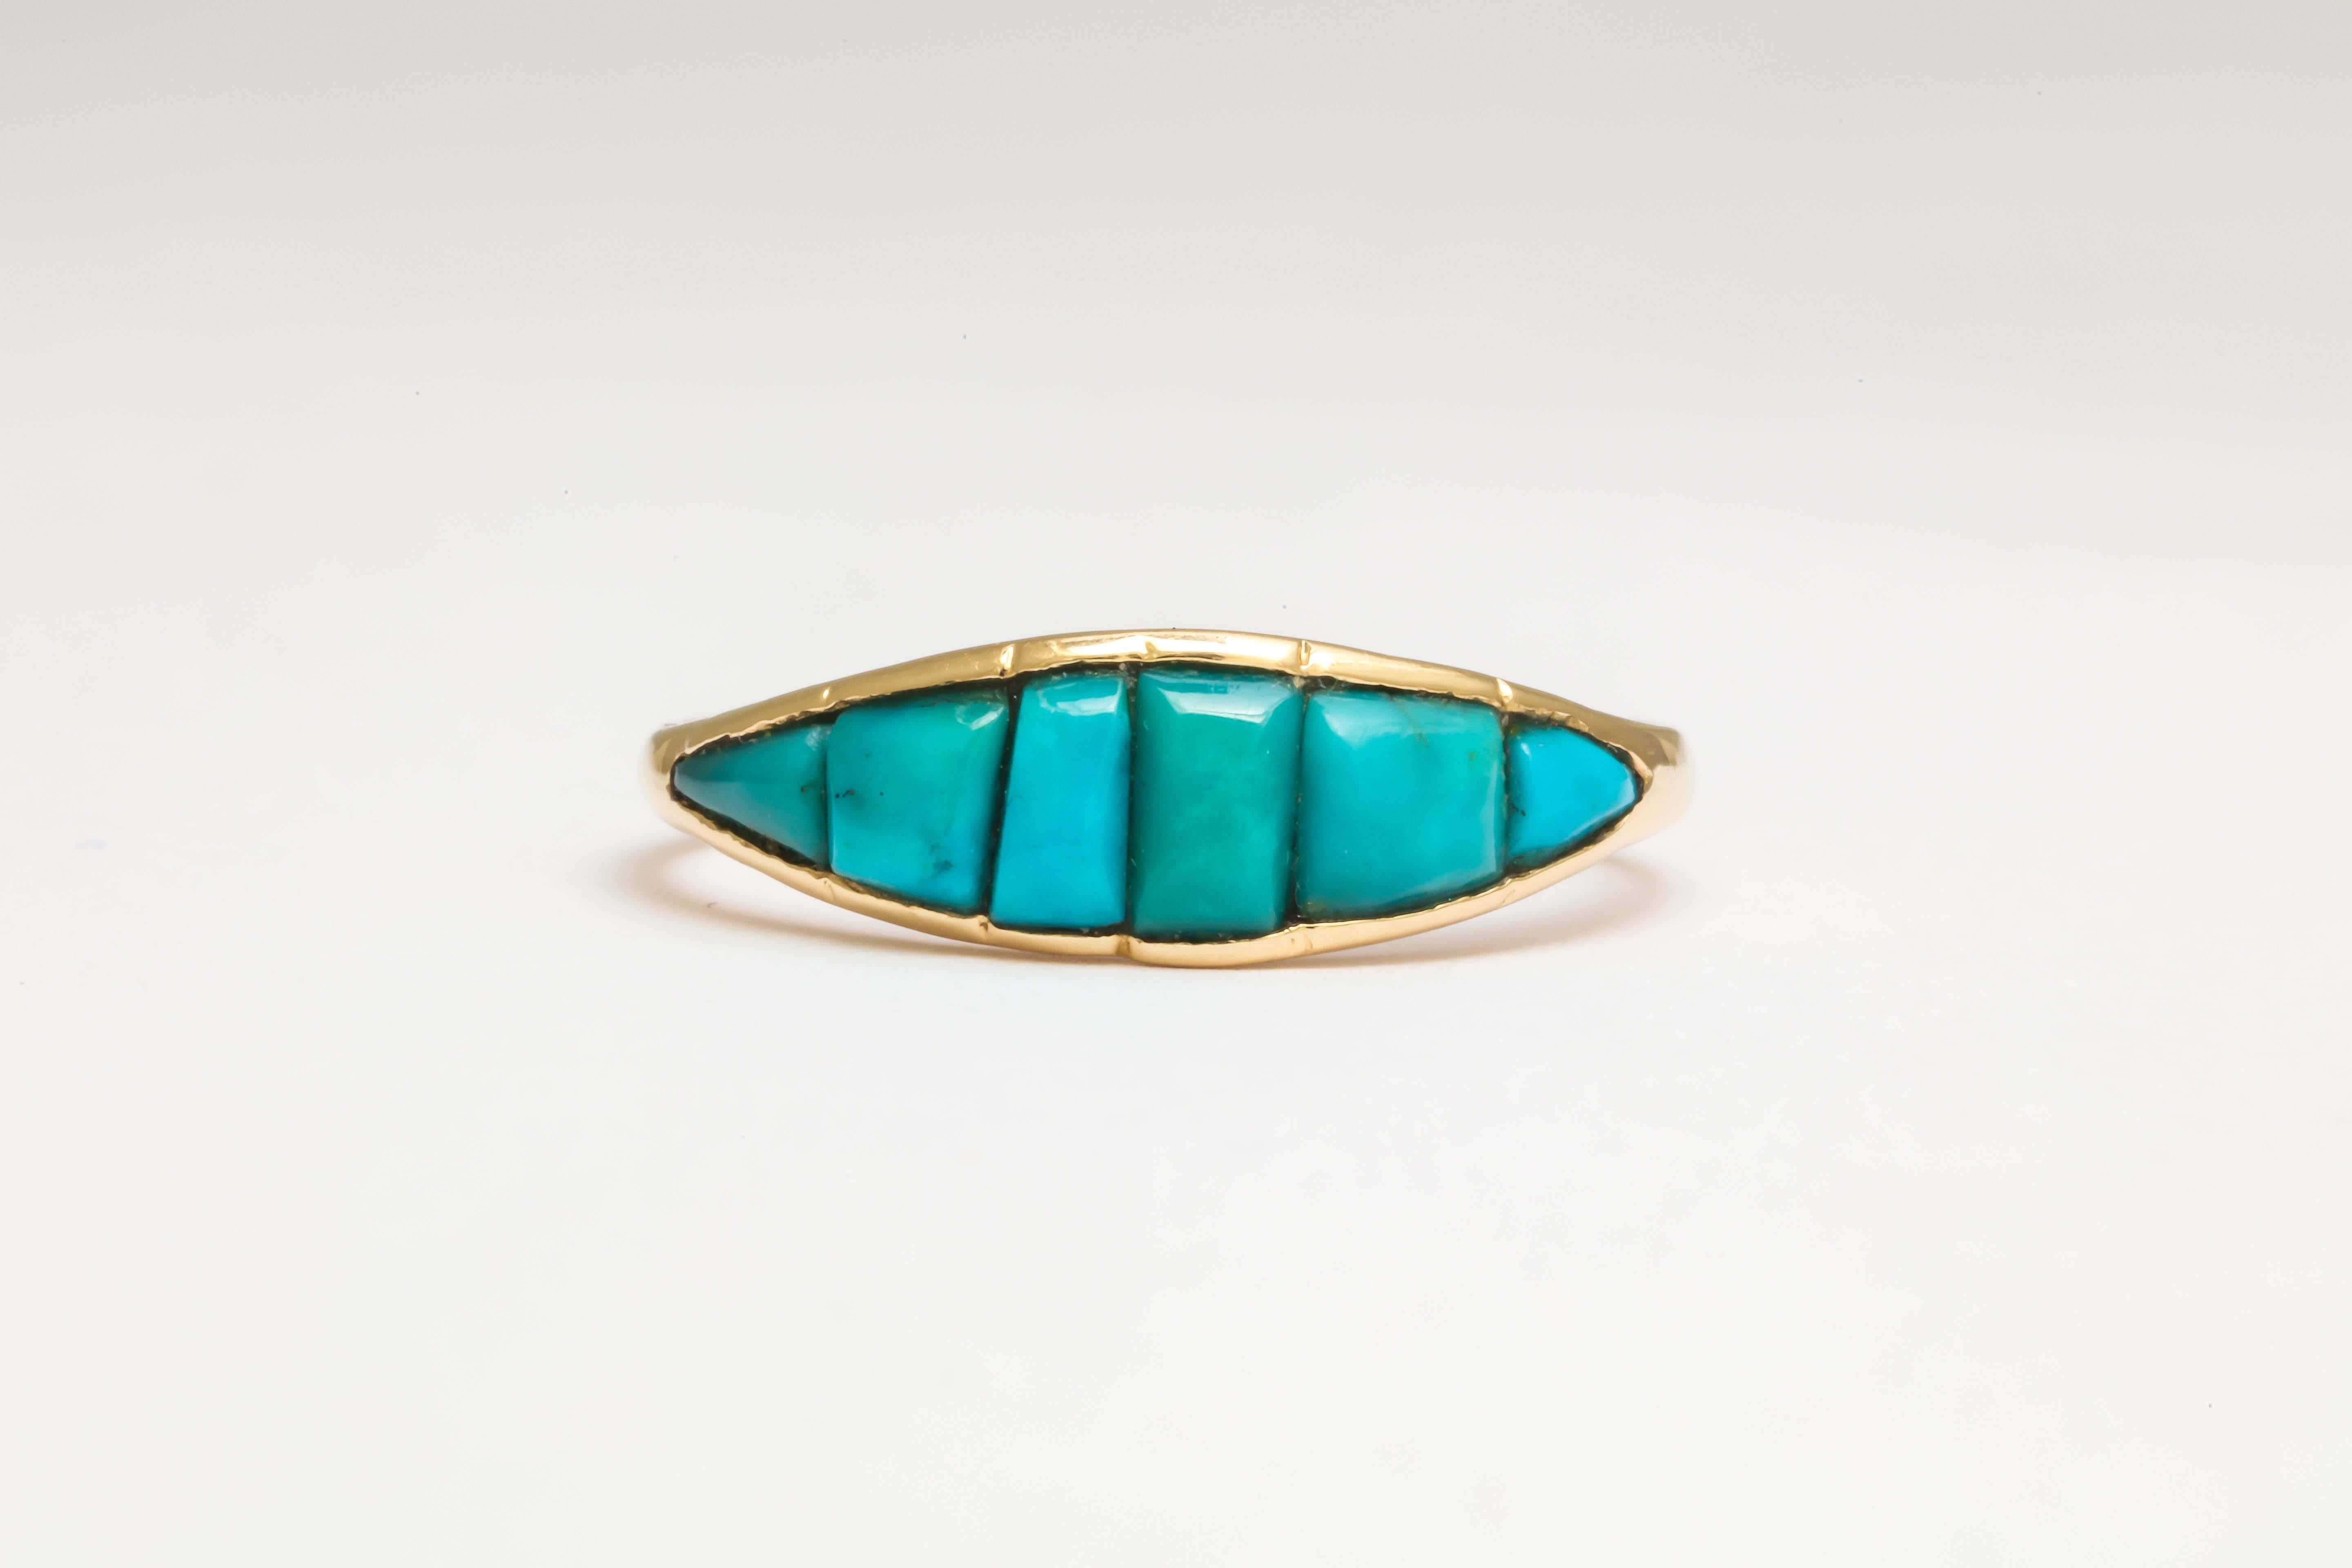 Impeccably made, this ring is set with 6 Persian turquoise that have been cut to fit in the navette shape. It is quite early, of the Georgian period, and has a closed back setting indicative of the period. 